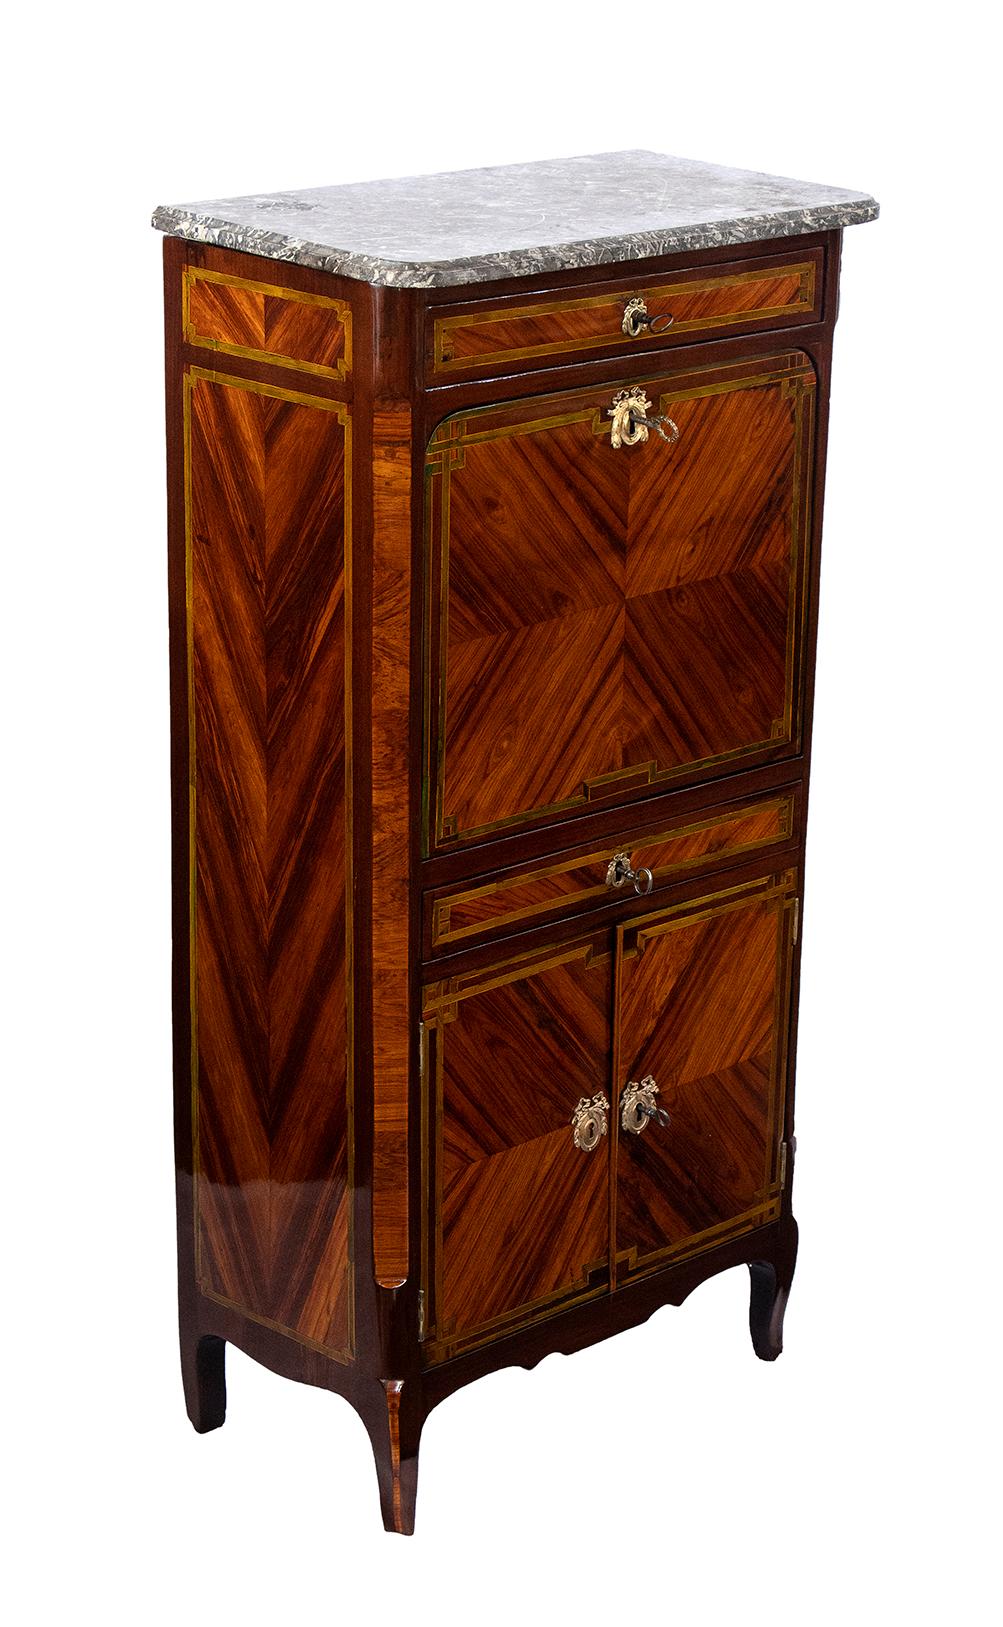 Inlay 18th Century French Louis XV Kingwood Secretaire 1780 Signed P. Plée JME For Sale